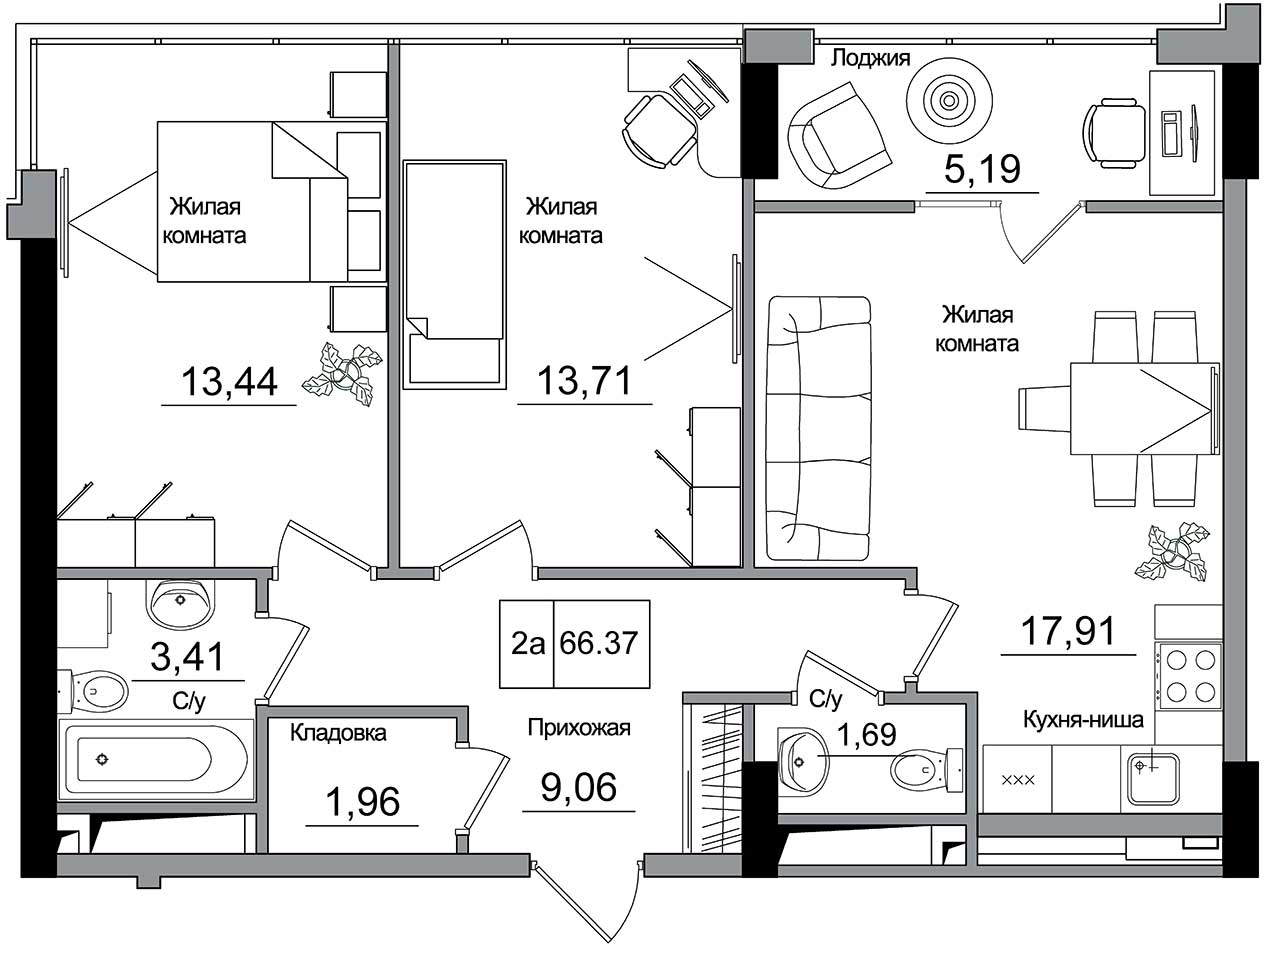 Planning 2-rm flats area 66.37m2, AB-16-12/00006.